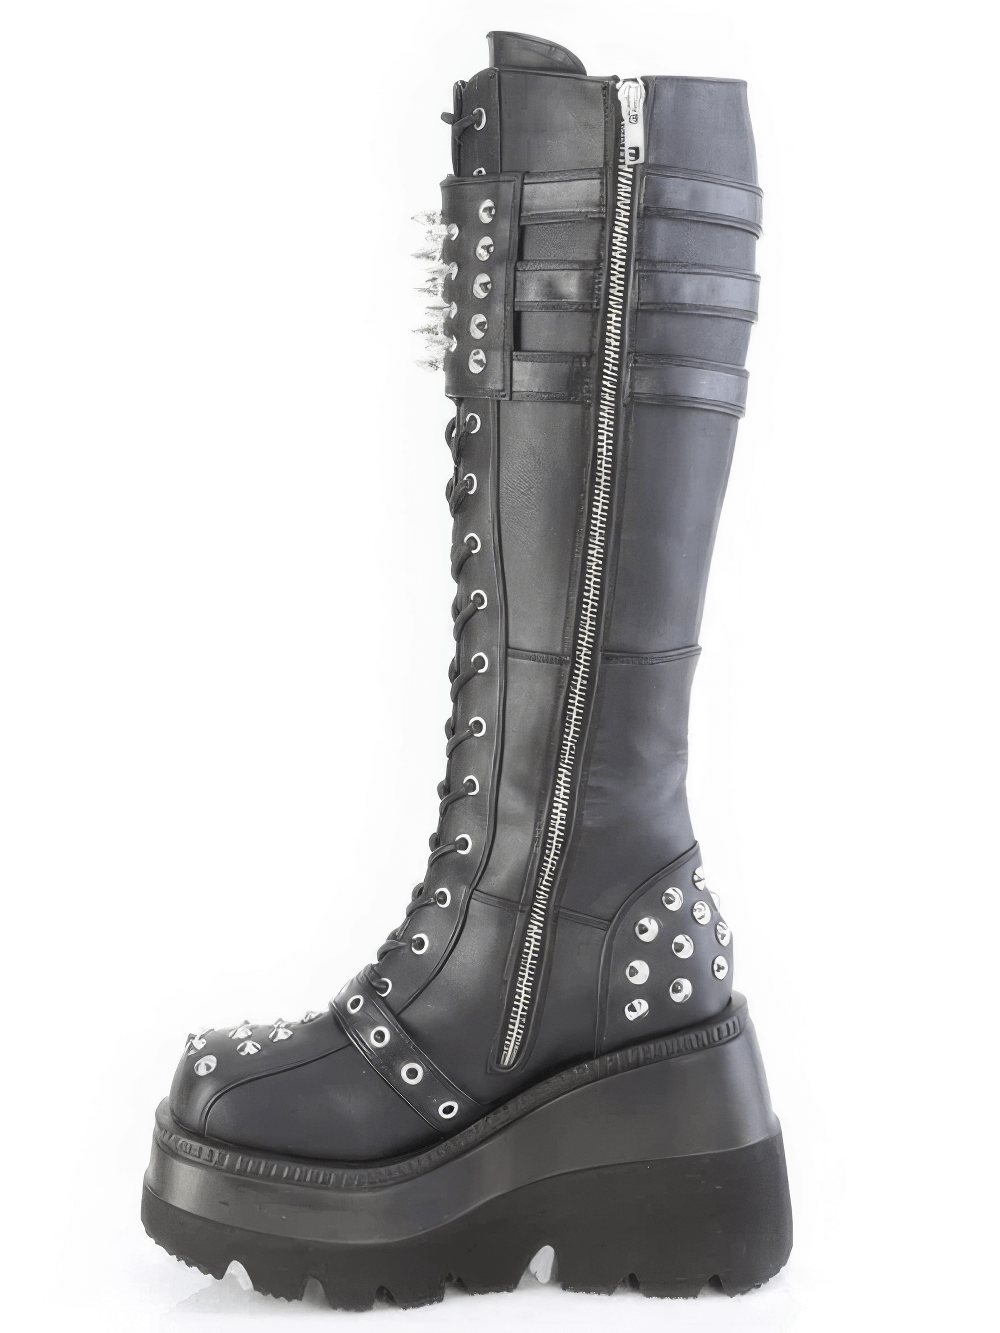 DEMONIA Black Knee-High Lace-Up Boots with Spiked Shield